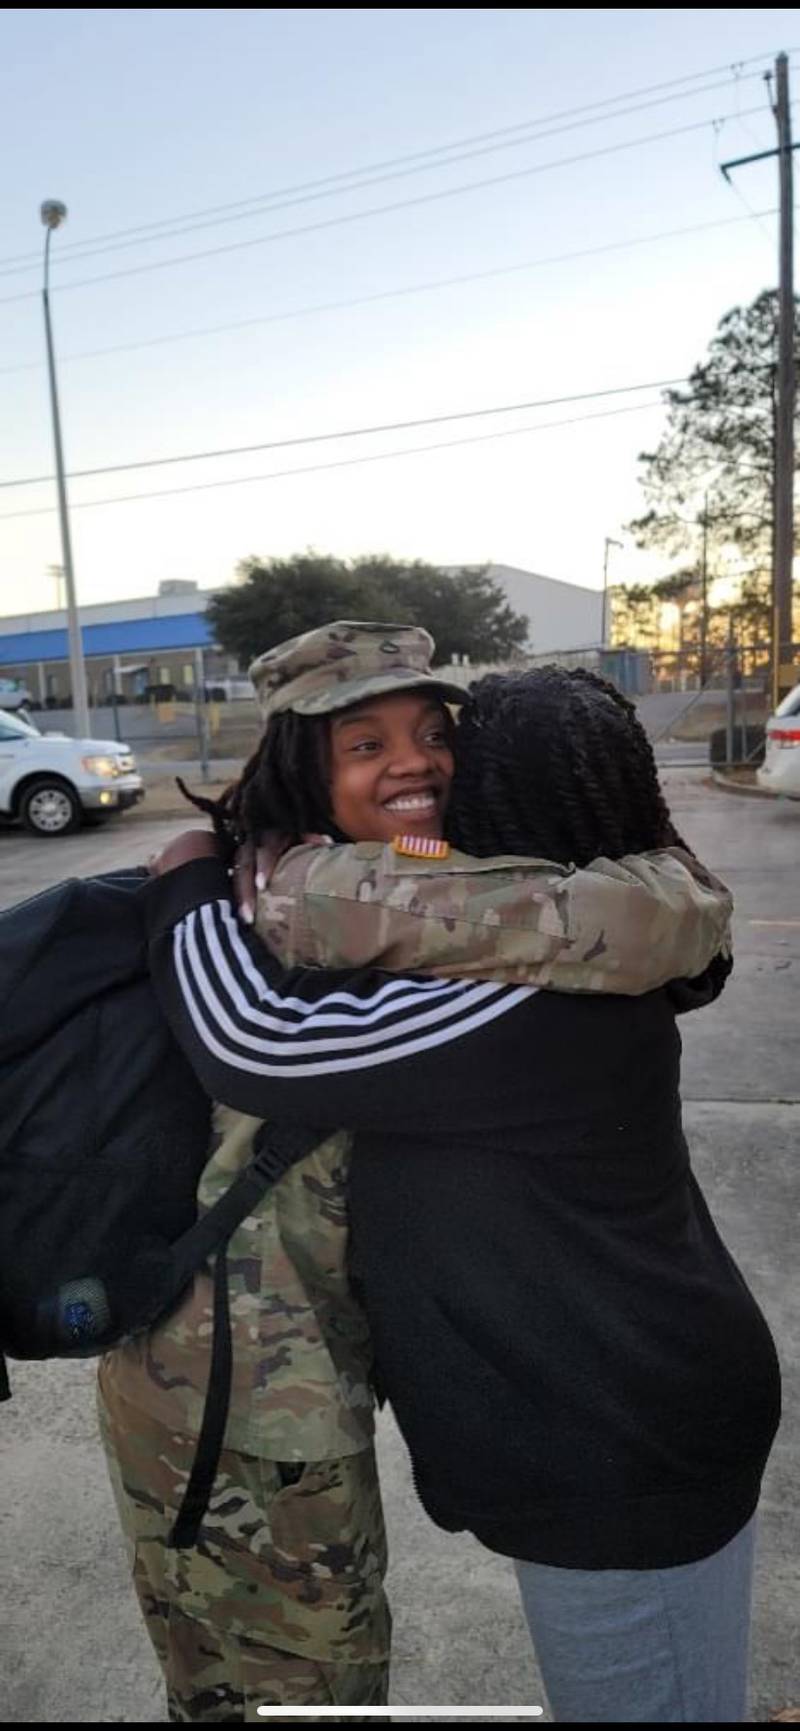 Oneida Oliver-Sanders has identified her daughter, 24-year-old Spc. Kennedy Ladon Sanders from Waycross, as one of the soldiers killed in a drone attack in Jordan.